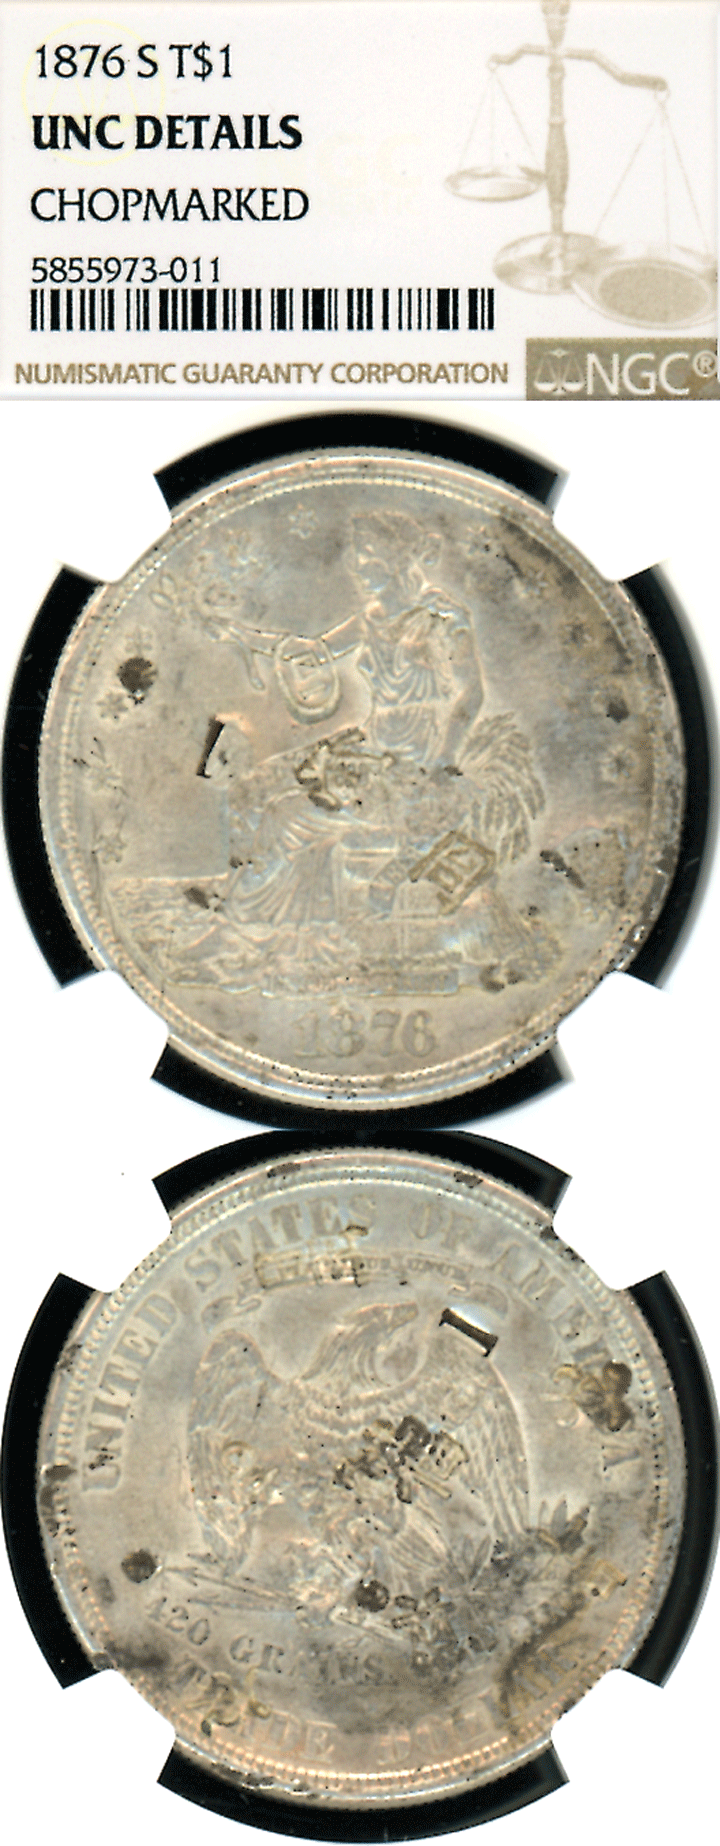 1876-S Trade $ NGC Unc Details